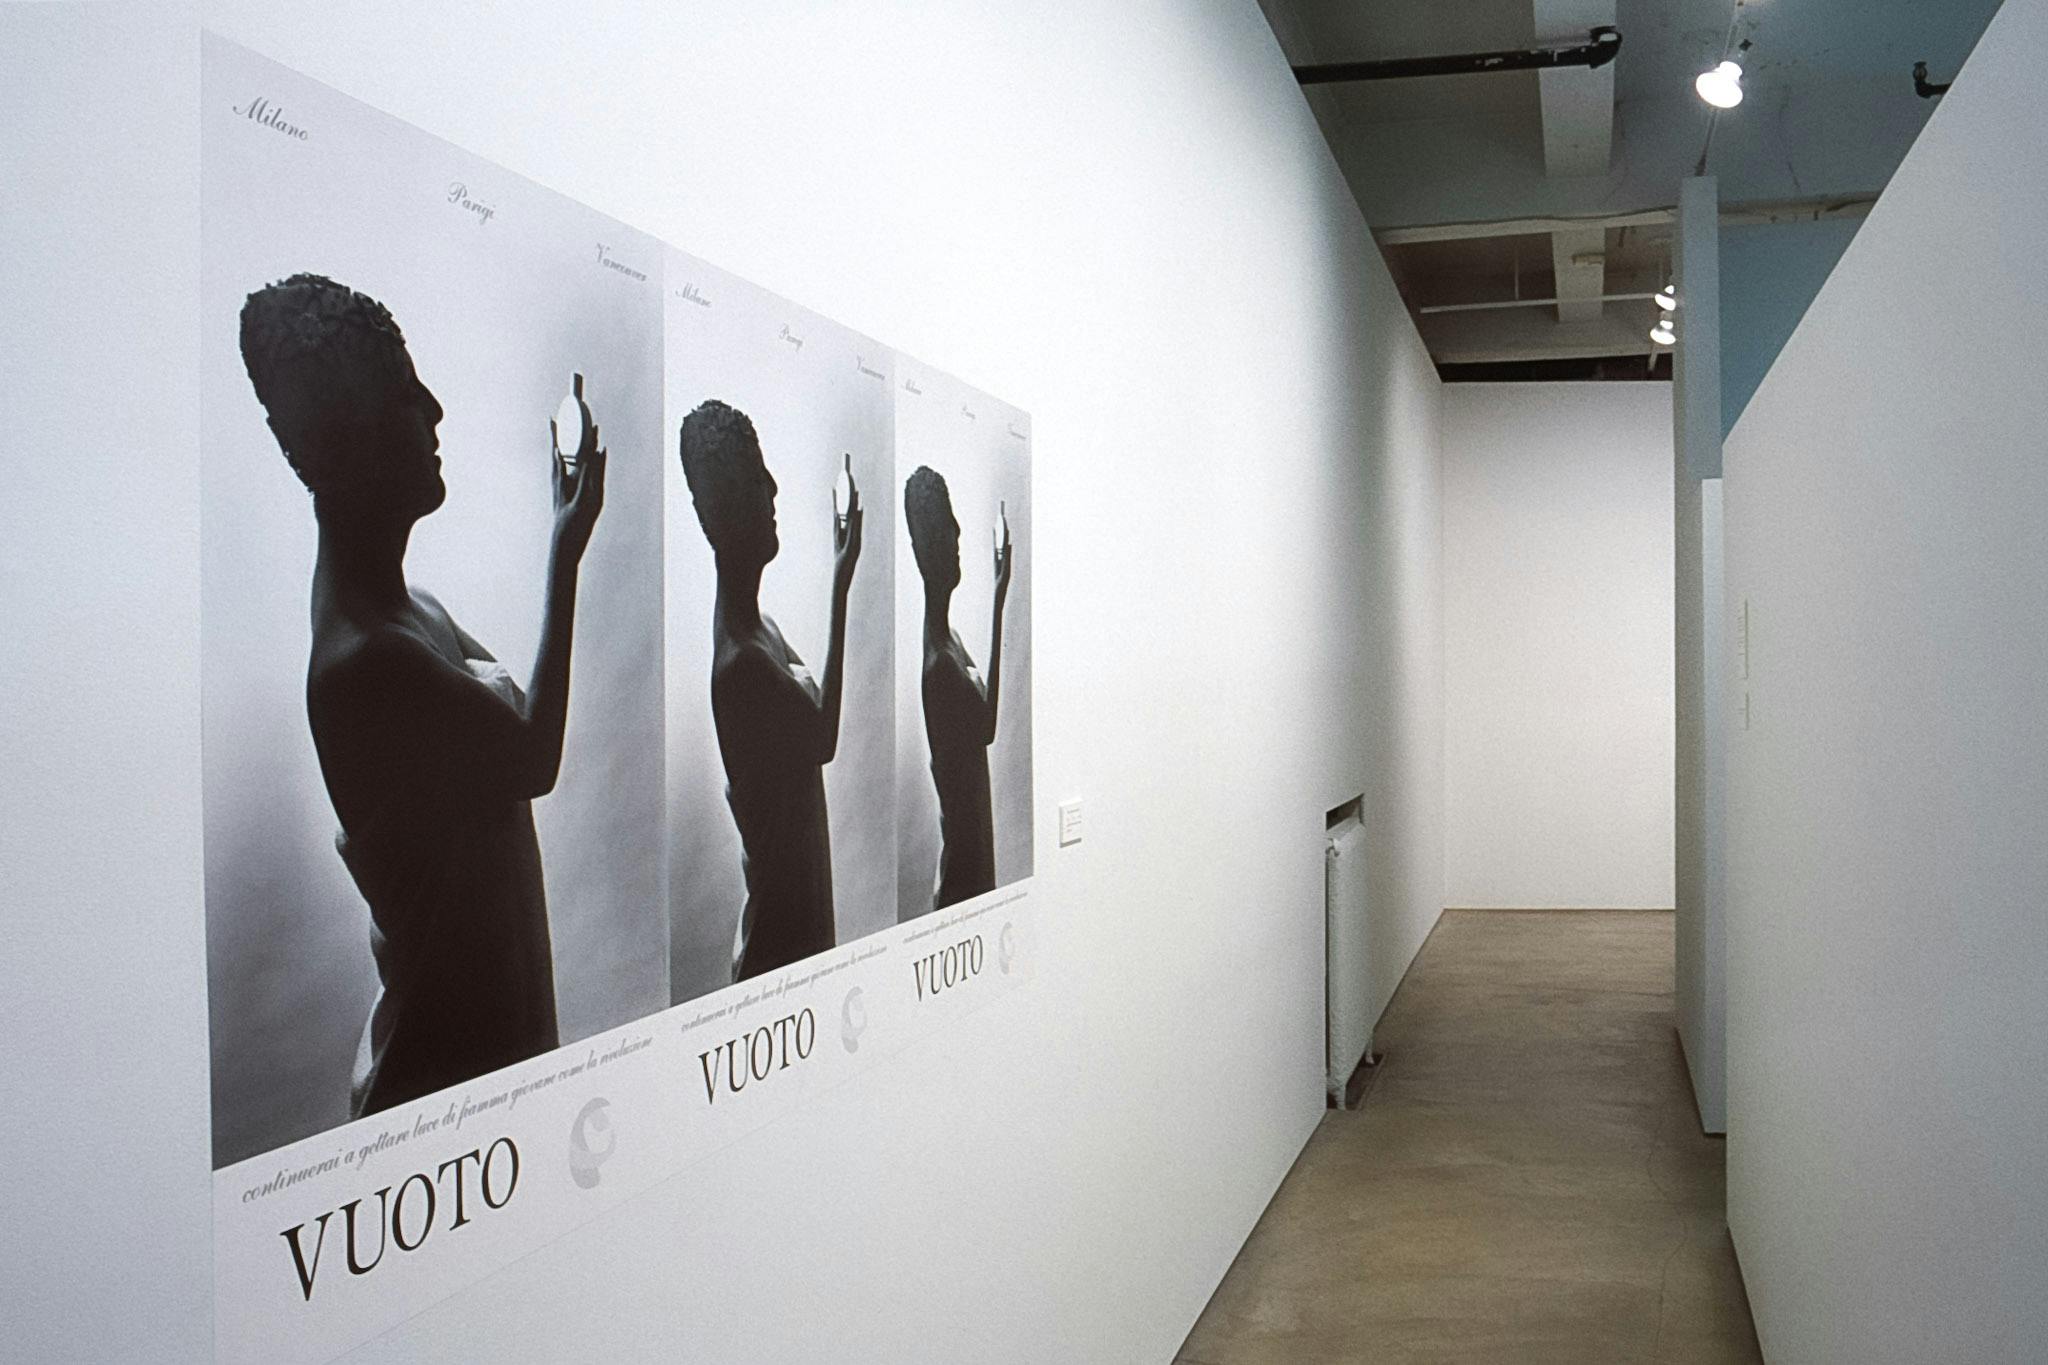 Three identical posters align on the gallery wall. The poster contains a black and white photo image of a short-haired person looking at a small flat bottle. The word VUOTO is typed below the image.  